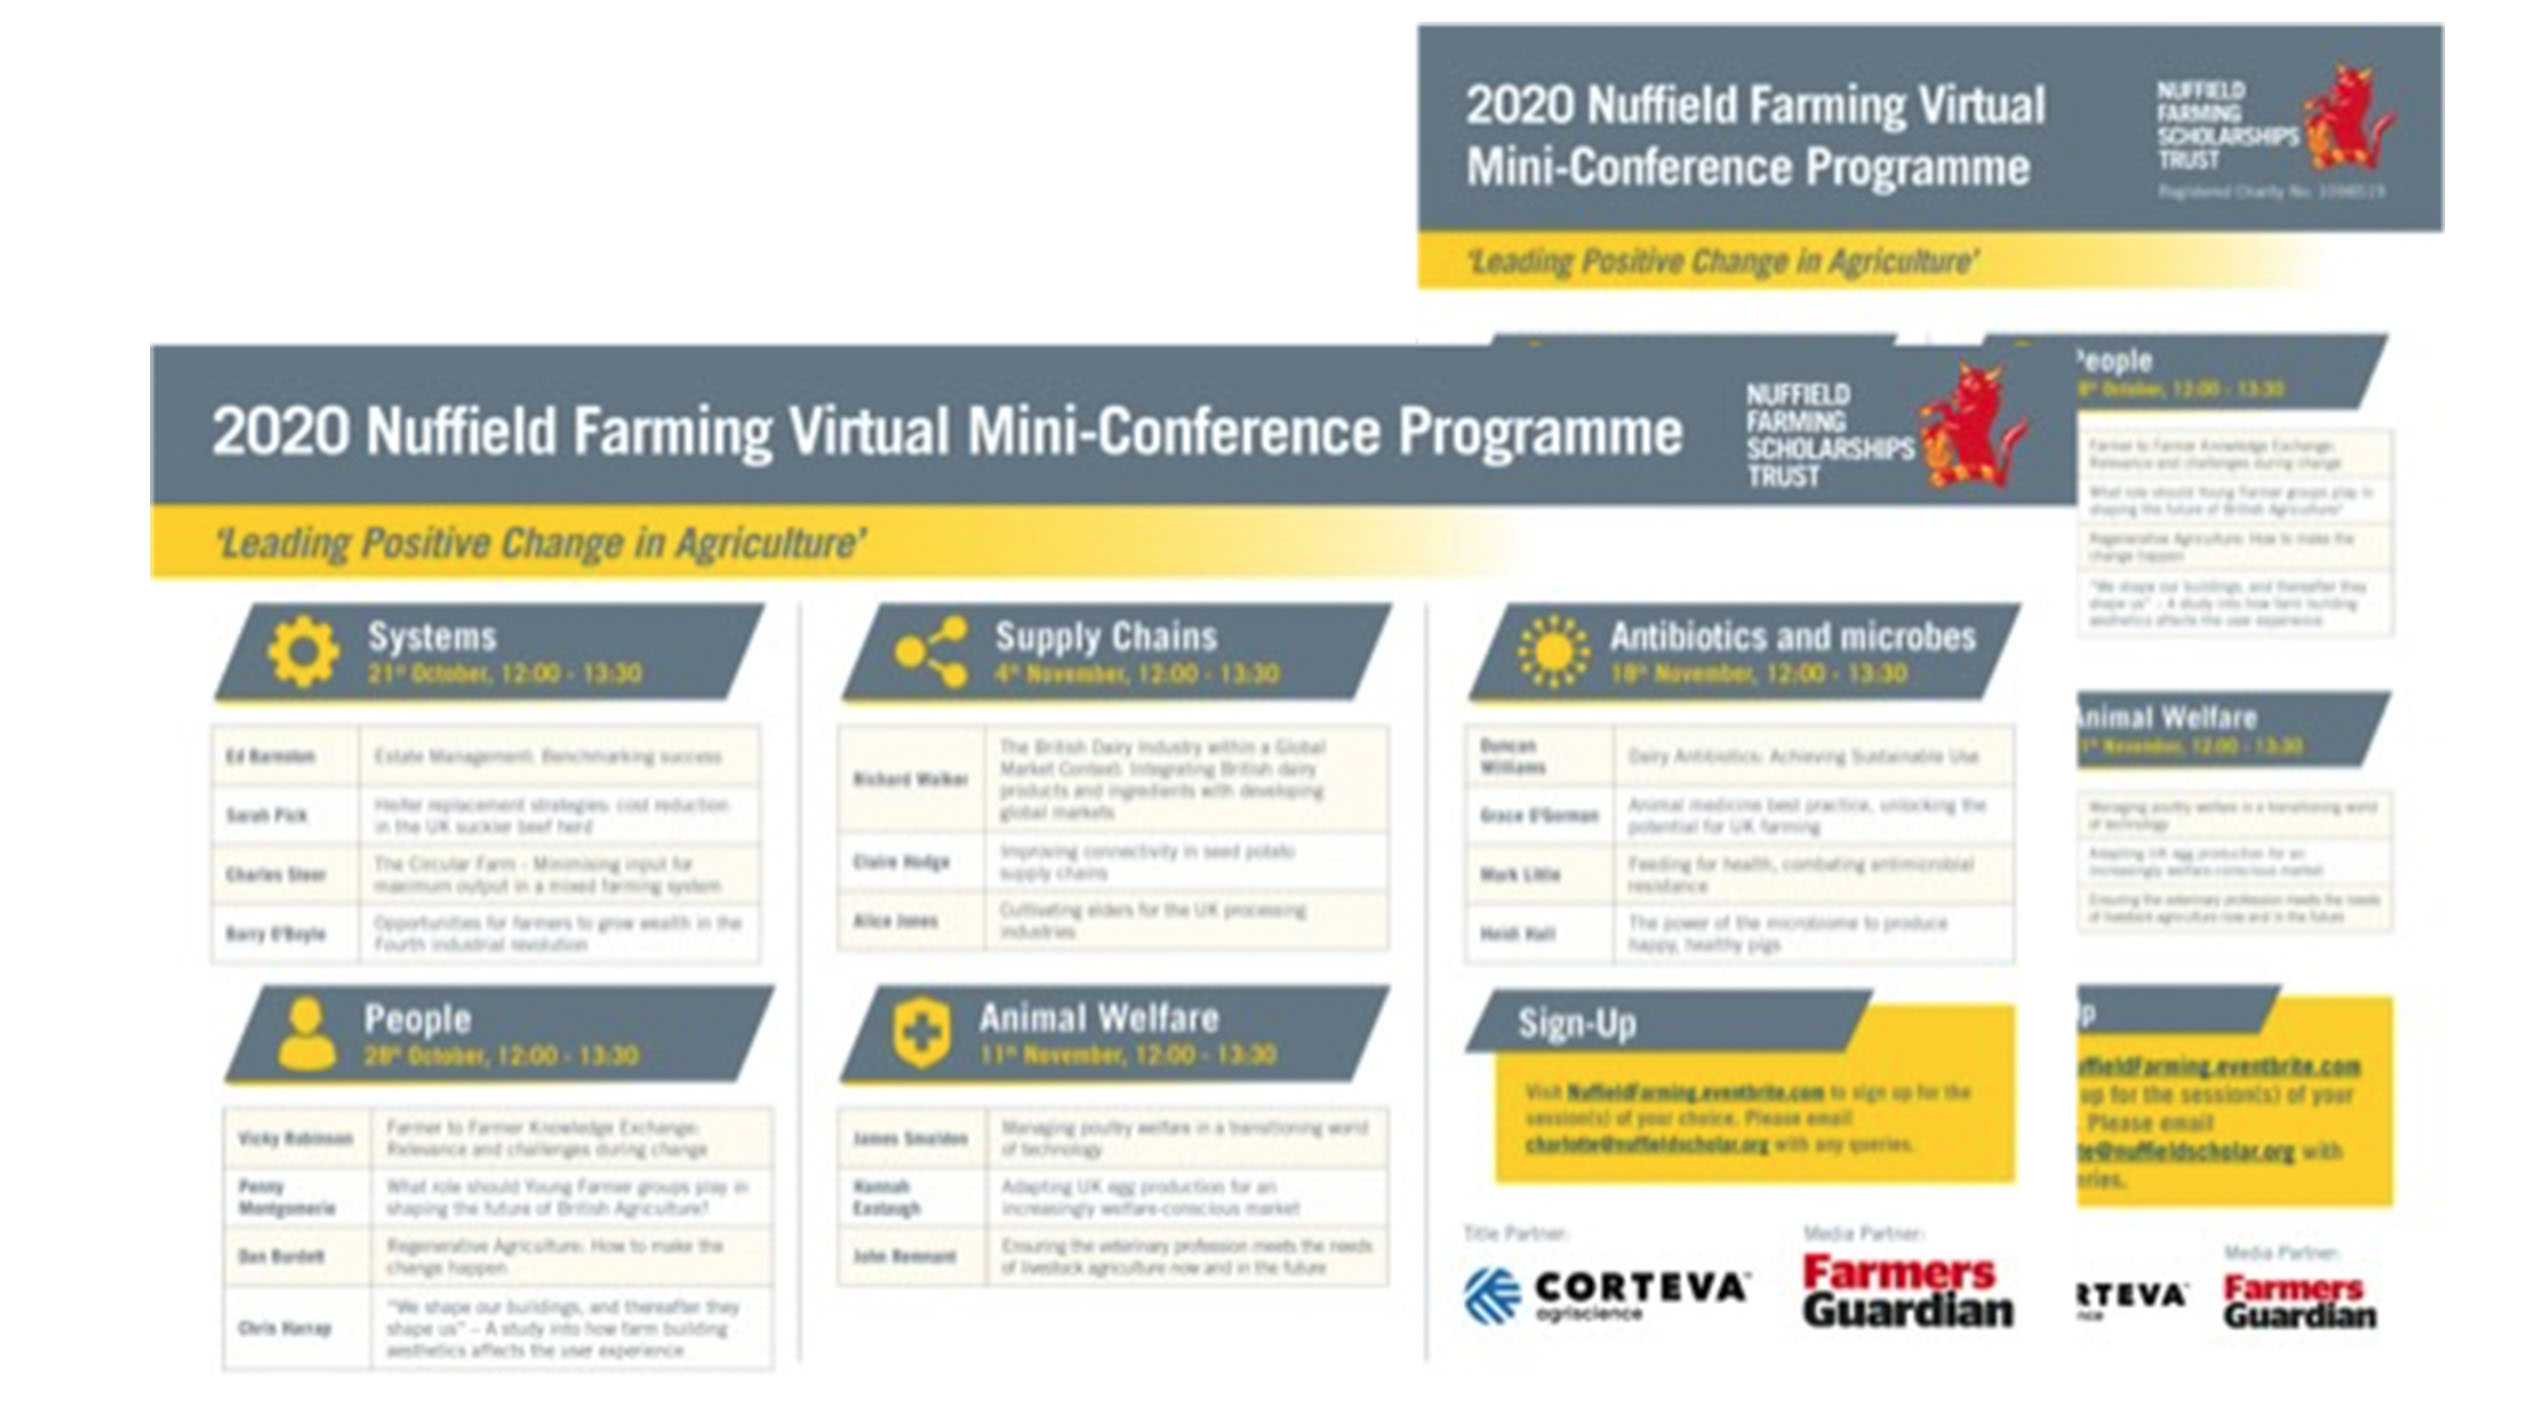 An image of the Nuffield Farming Scholarships website